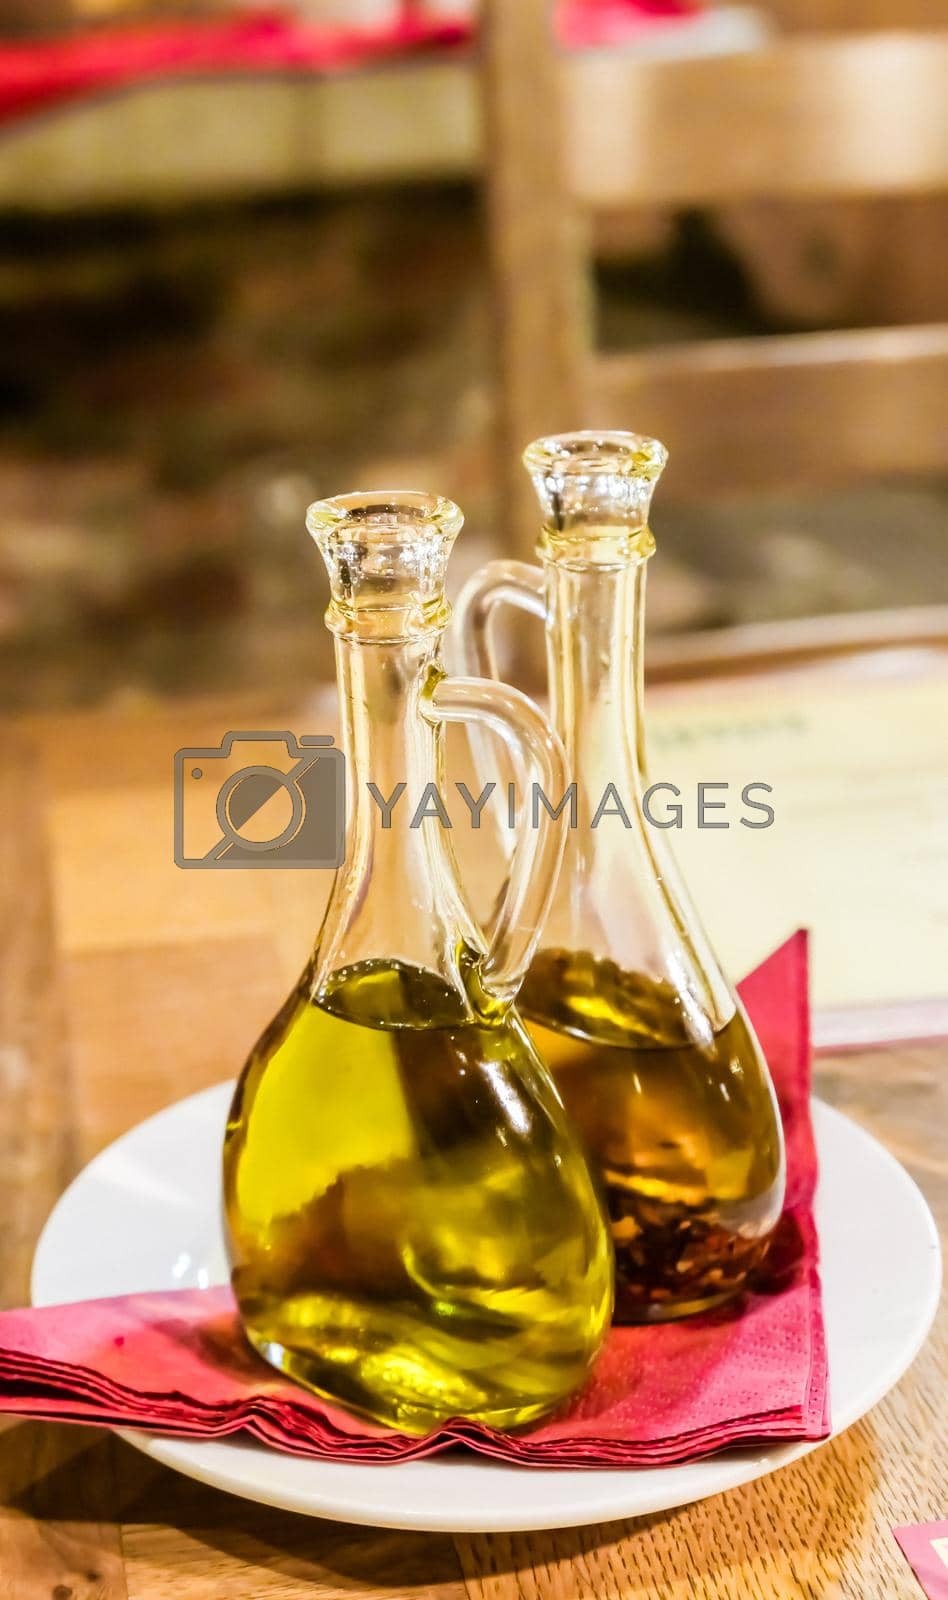 Royalty free image of Bottles of organic extra virgin olive oil in Italian restaurant by Anneleven